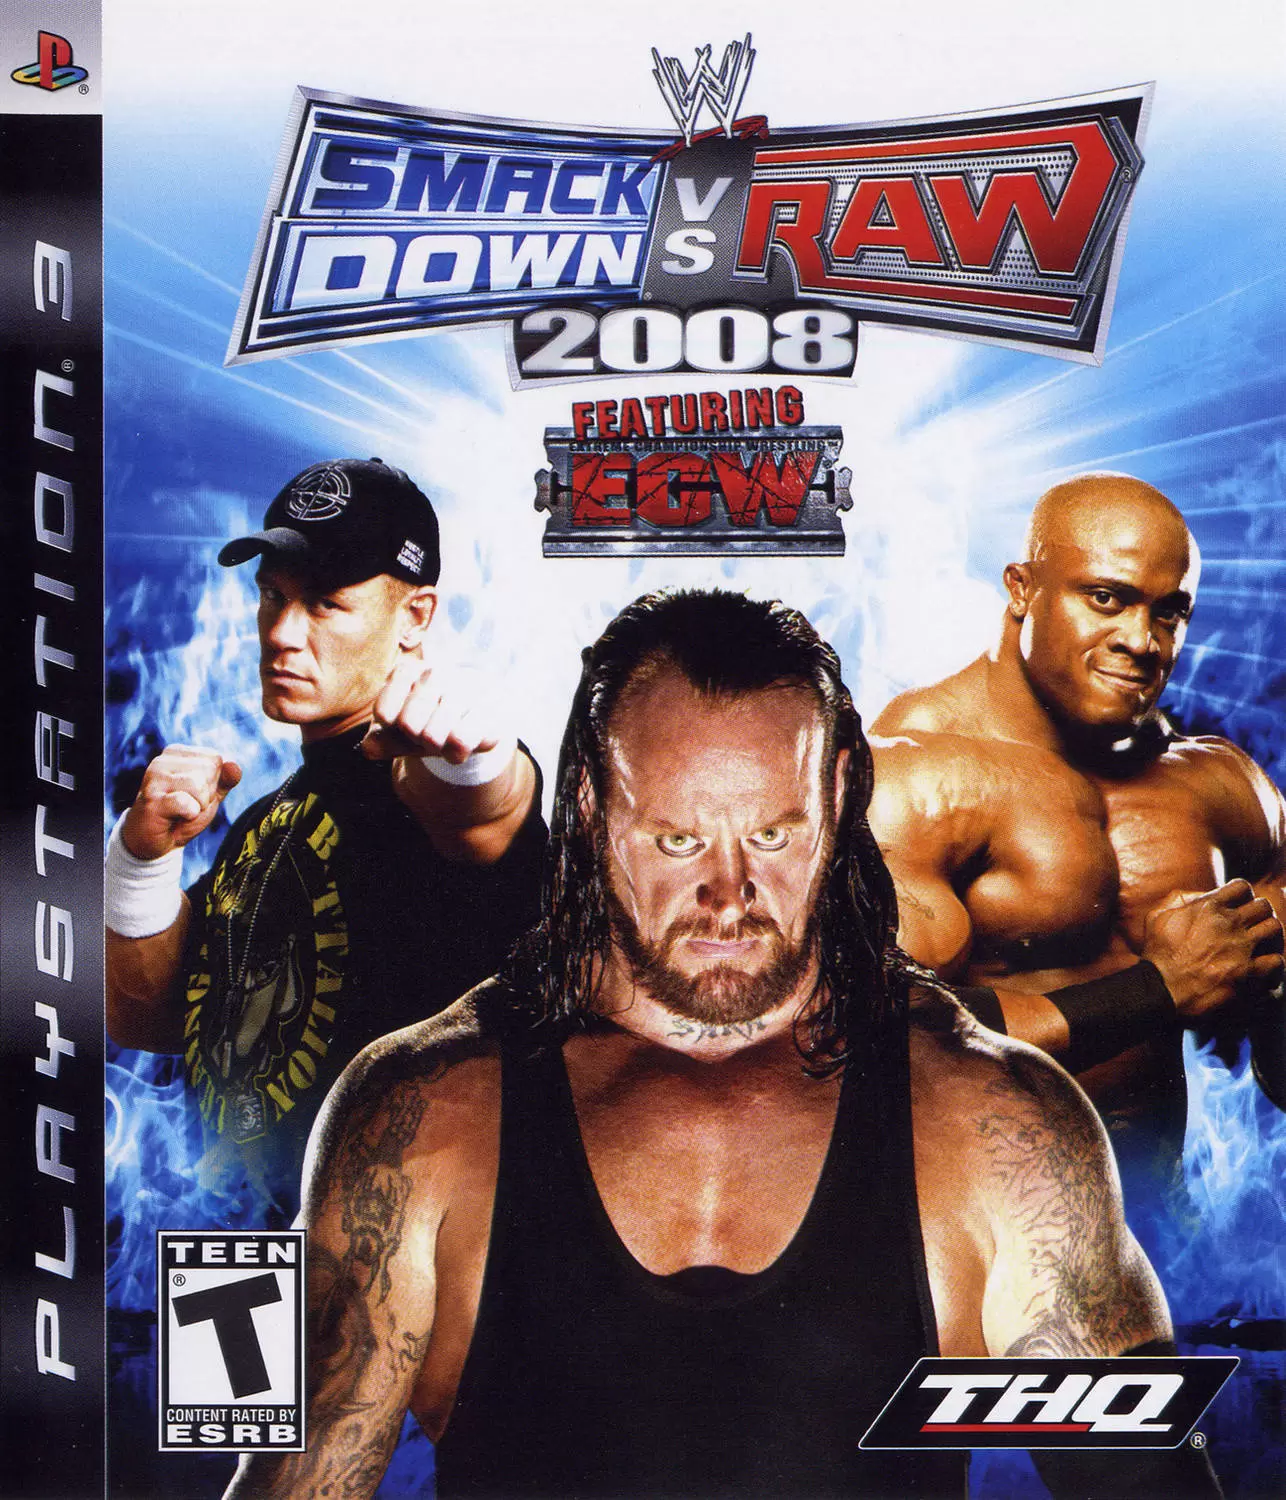 PS3 Games - WWE SmackDown vs. Raw 2008